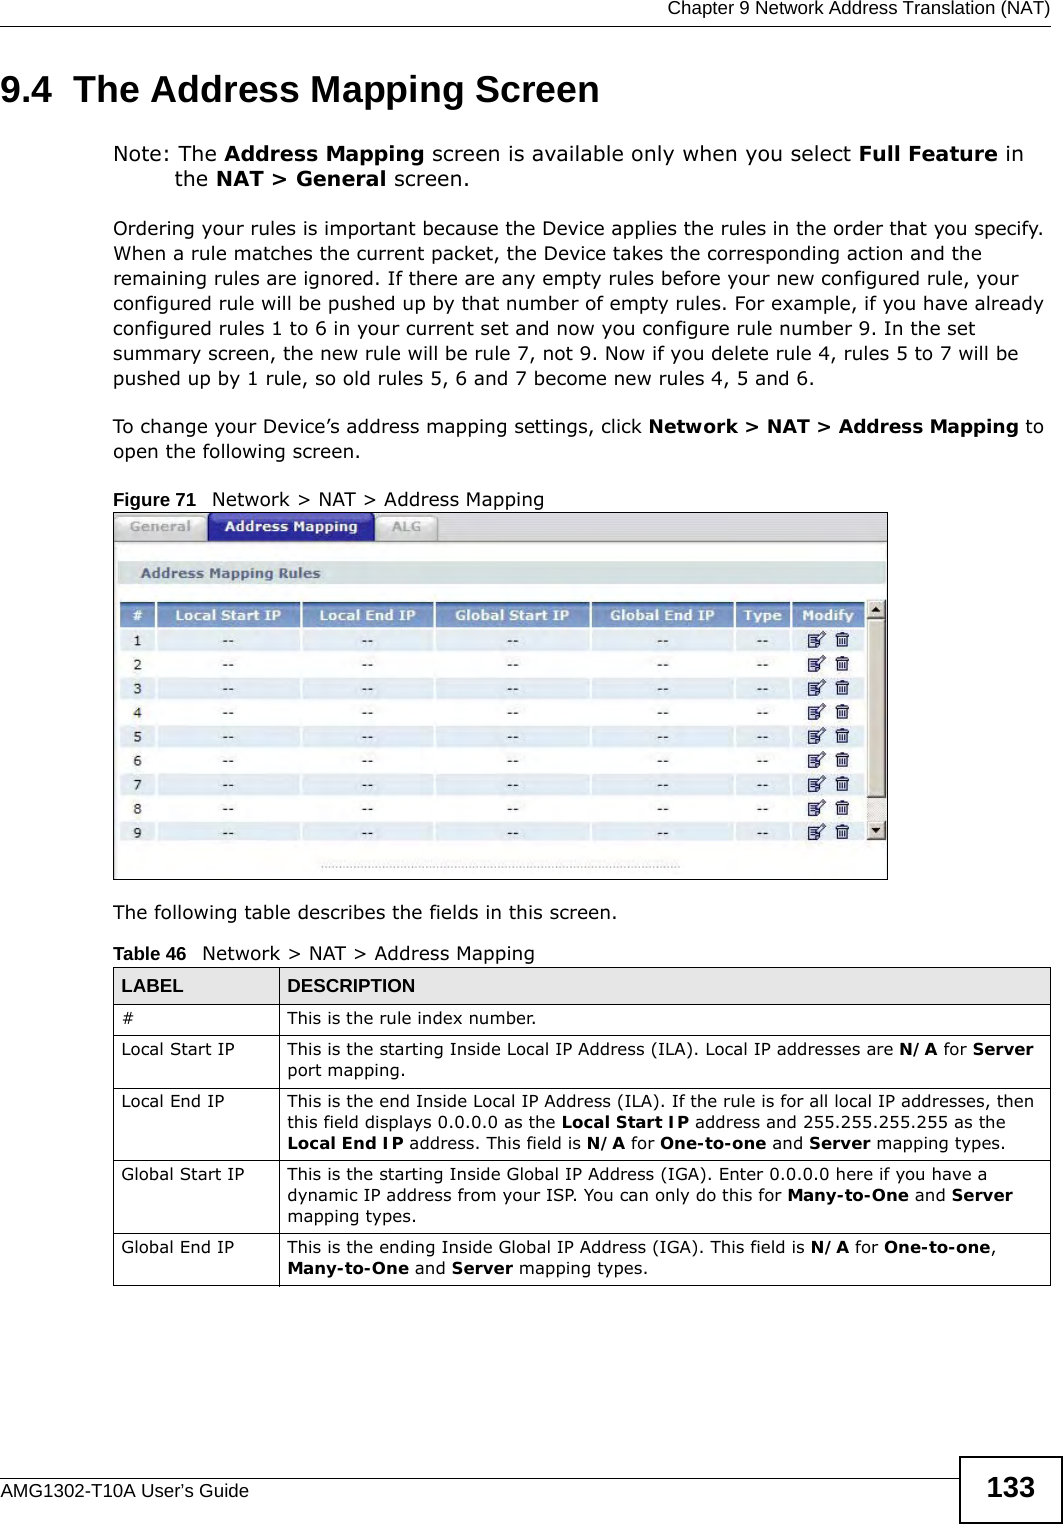  Chapter 9 Network Address Translation (NAT)AMG1302-T10A User’s Guide 1339.4  The Address Mapping ScreenNote: The Address Mapping screen is available only when you select Full Feature in the NAT &gt; General screen.Ordering your rules is important because the Device applies the rules in the order that you specify. When a rule matches the current packet, the Device takes the corresponding action and the remaining rules are ignored. If there are any empty rules before your new configured rule, your configured rule will be pushed up by that number of empty rules. For example, if you have already configured rules 1 to 6 in your current set and now you configure rule number 9. In the set summary screen, the new rule will be rule 7, not 9. Now if you delete rule 4, rules 5 to 7 will be pushed up by 1 rule, so old rules 5, 6 and 7 become new rules 4, 5 and 6. To change your Device’s address mapping settings, click Network &gt; NAT &gt; Address Mapping to open the following screen.Figure 71   Network &gt; NAT &gt; Address MappingThe following table describes the fields in this screen.Table 46   Network &gt; NAT &gt; Address MappingLABEL DESCRIPTION#This is the rule index number.Local Start IP This is the starting Inside Local IP Address (ILA). Local IP addresses are N/A for Server port mapping.Local End IP This is the end Inside Local IP Address (ILA). If the rule is for all local IP addresses, then this field displays 0.0.0.0 as the Local Start IP address and 255.255.255.255 as the Local End IP address. This field is N/A for One-to-one and Server mapping types.Global Start IP This is the starting Inside Global IP Address (IGA). Enter 0.0.0.0 here if you have a dynamic IP address from your ISP. You can only do this for Many-to-One and Server mapping types. Global End IP This is the ending Inside Global IP Address (IGA). This field is N/A for One-to-one, Many-to-One and Server mapping types.